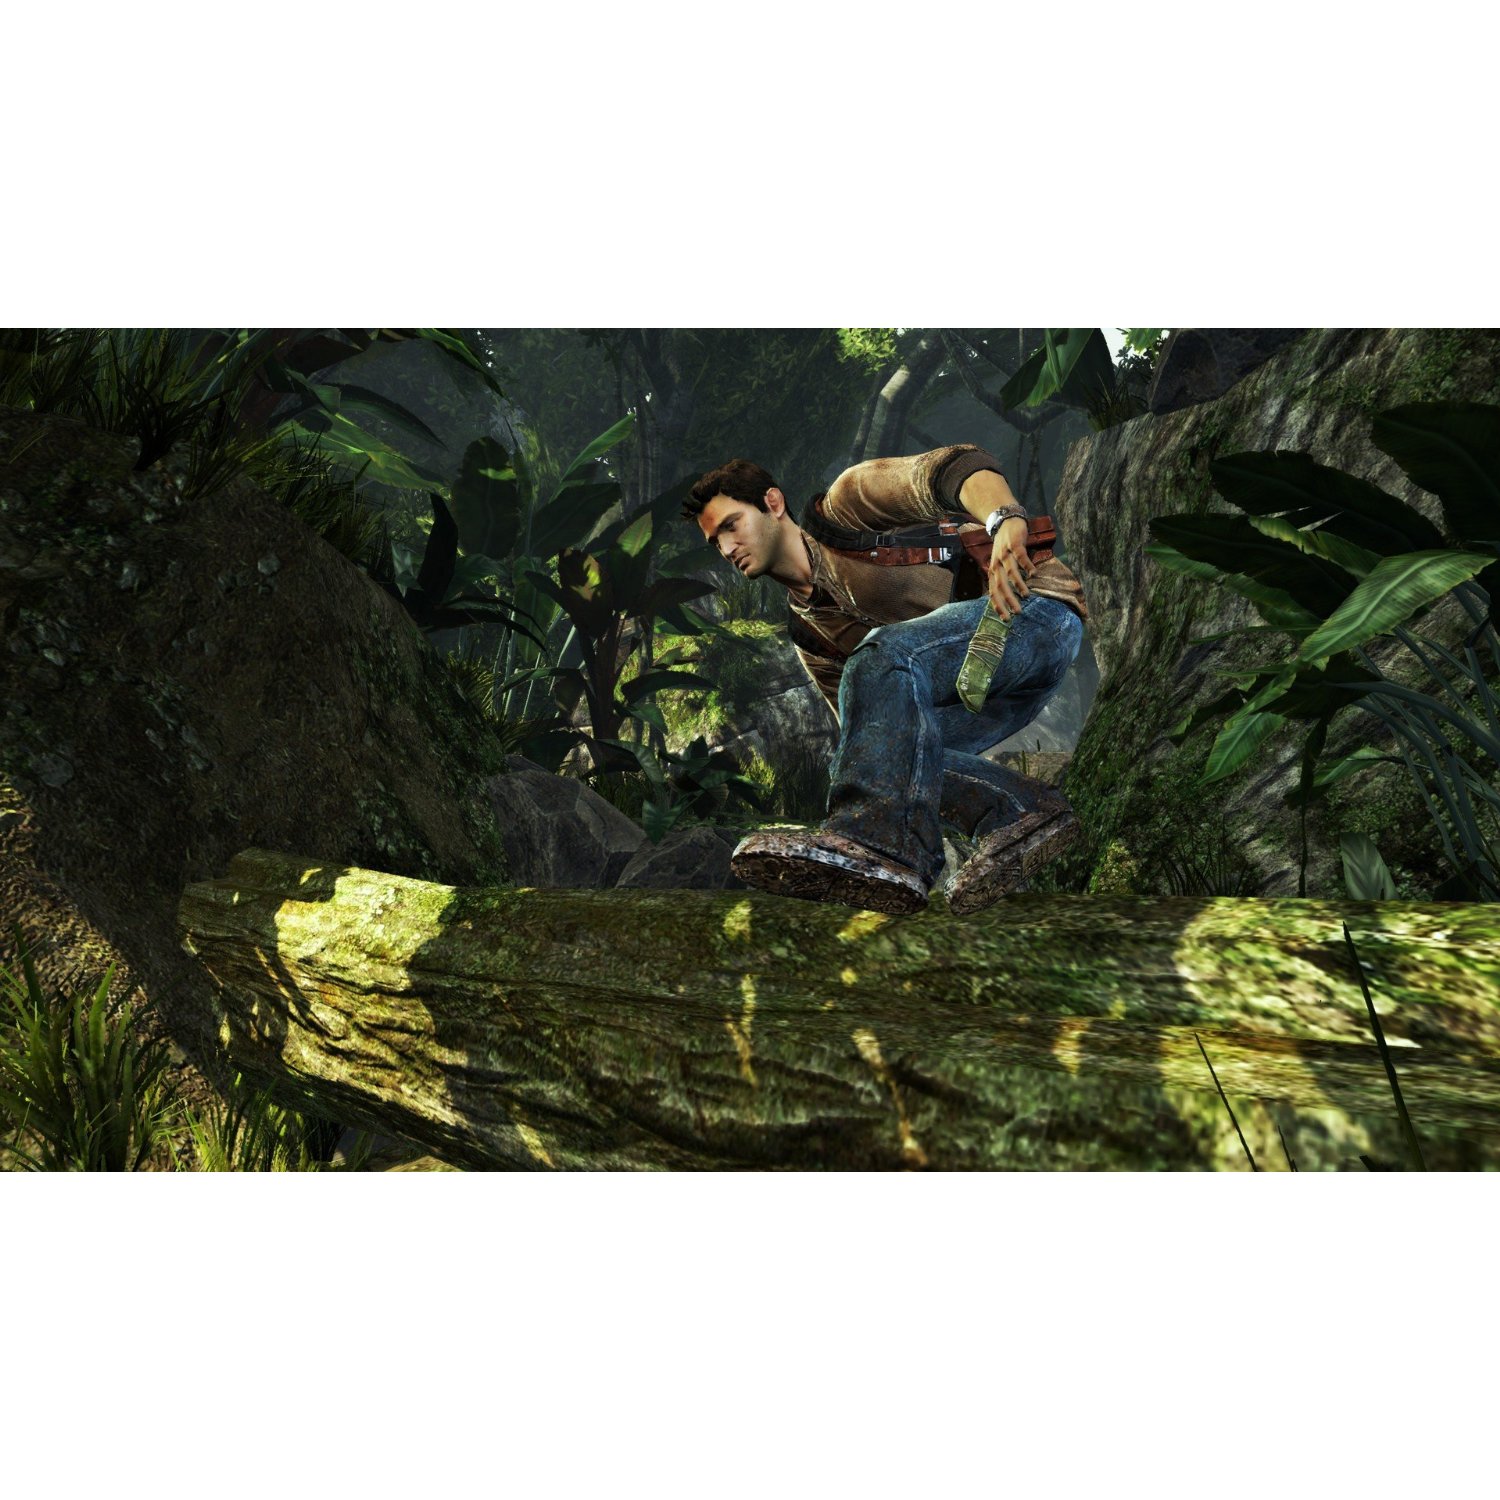 https://thetechjournal.com/wp-content/uploads/images/1112/1324125461-uncharted-golden-abyss-game-for-preorder-5.jpg